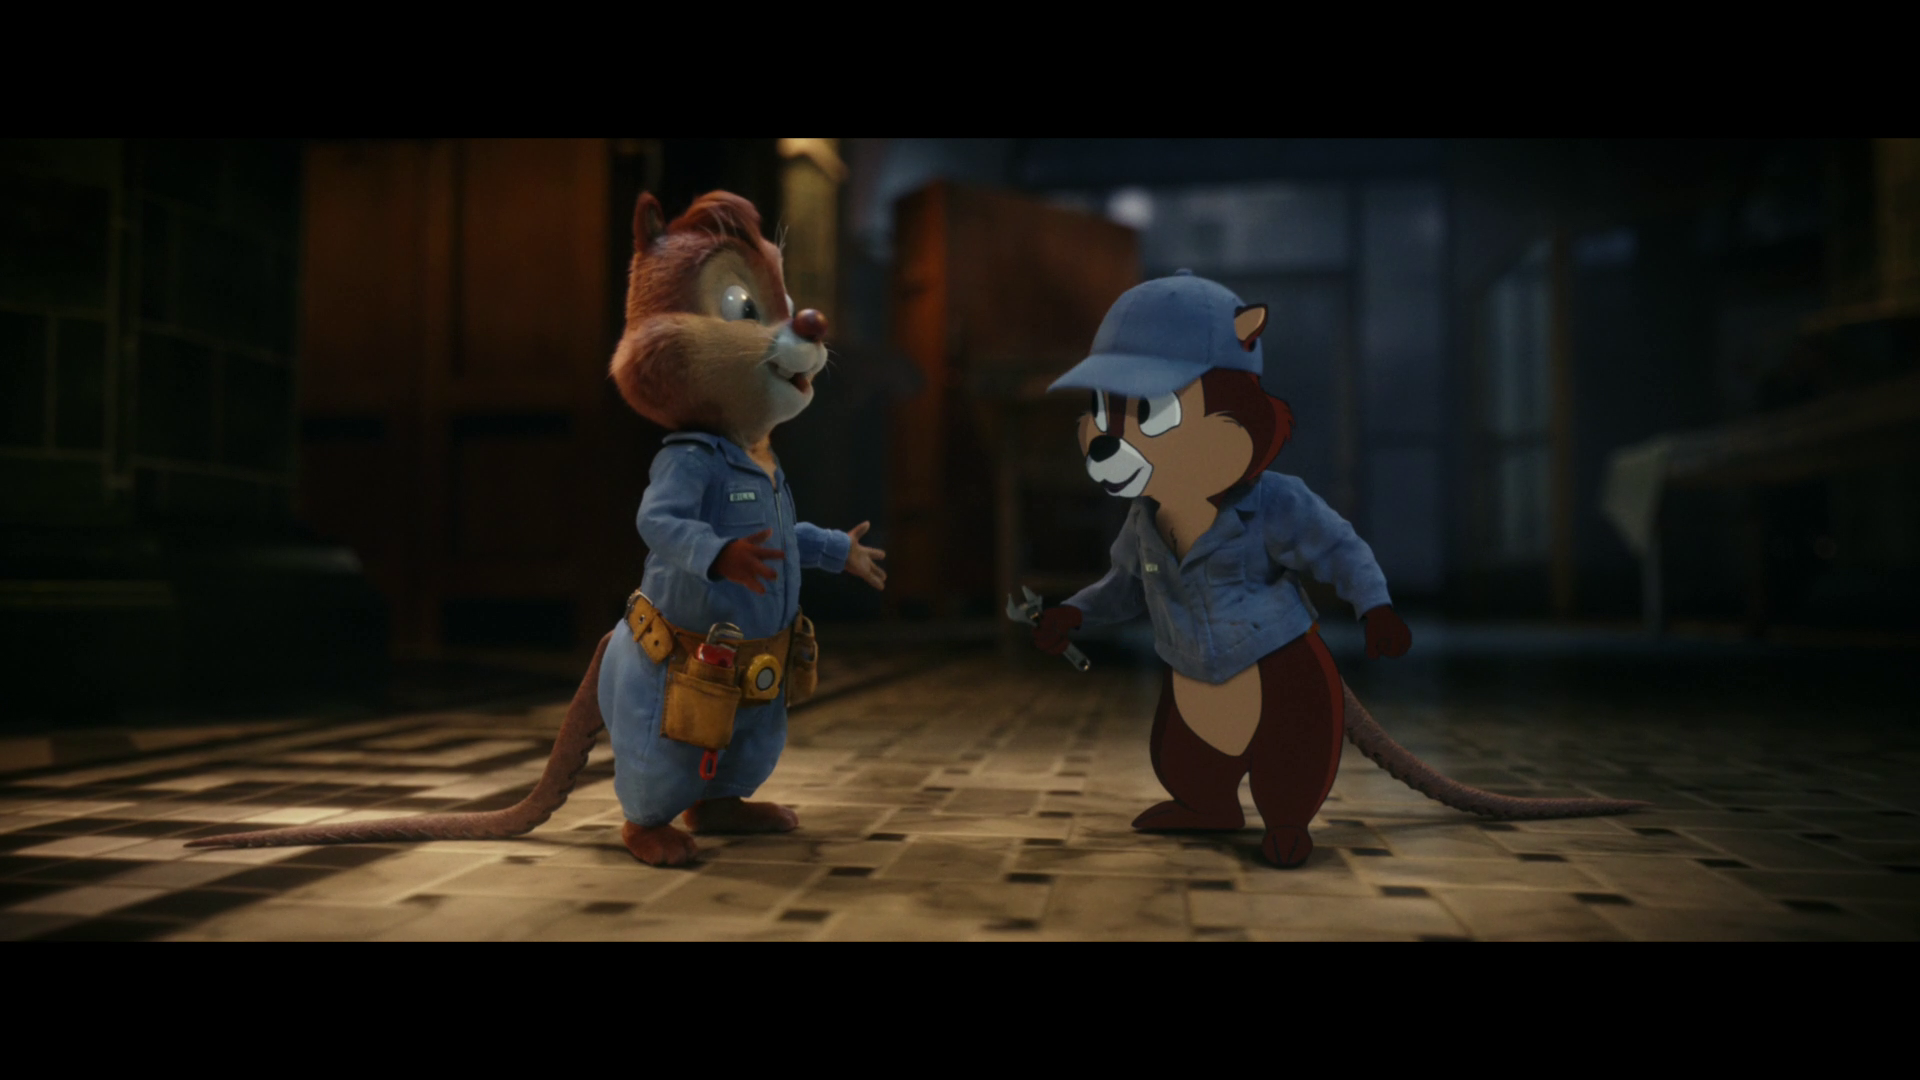 Review: New Chip 'N Dale movie hilariously spoofs classic games, cartoons |  Ars Technica